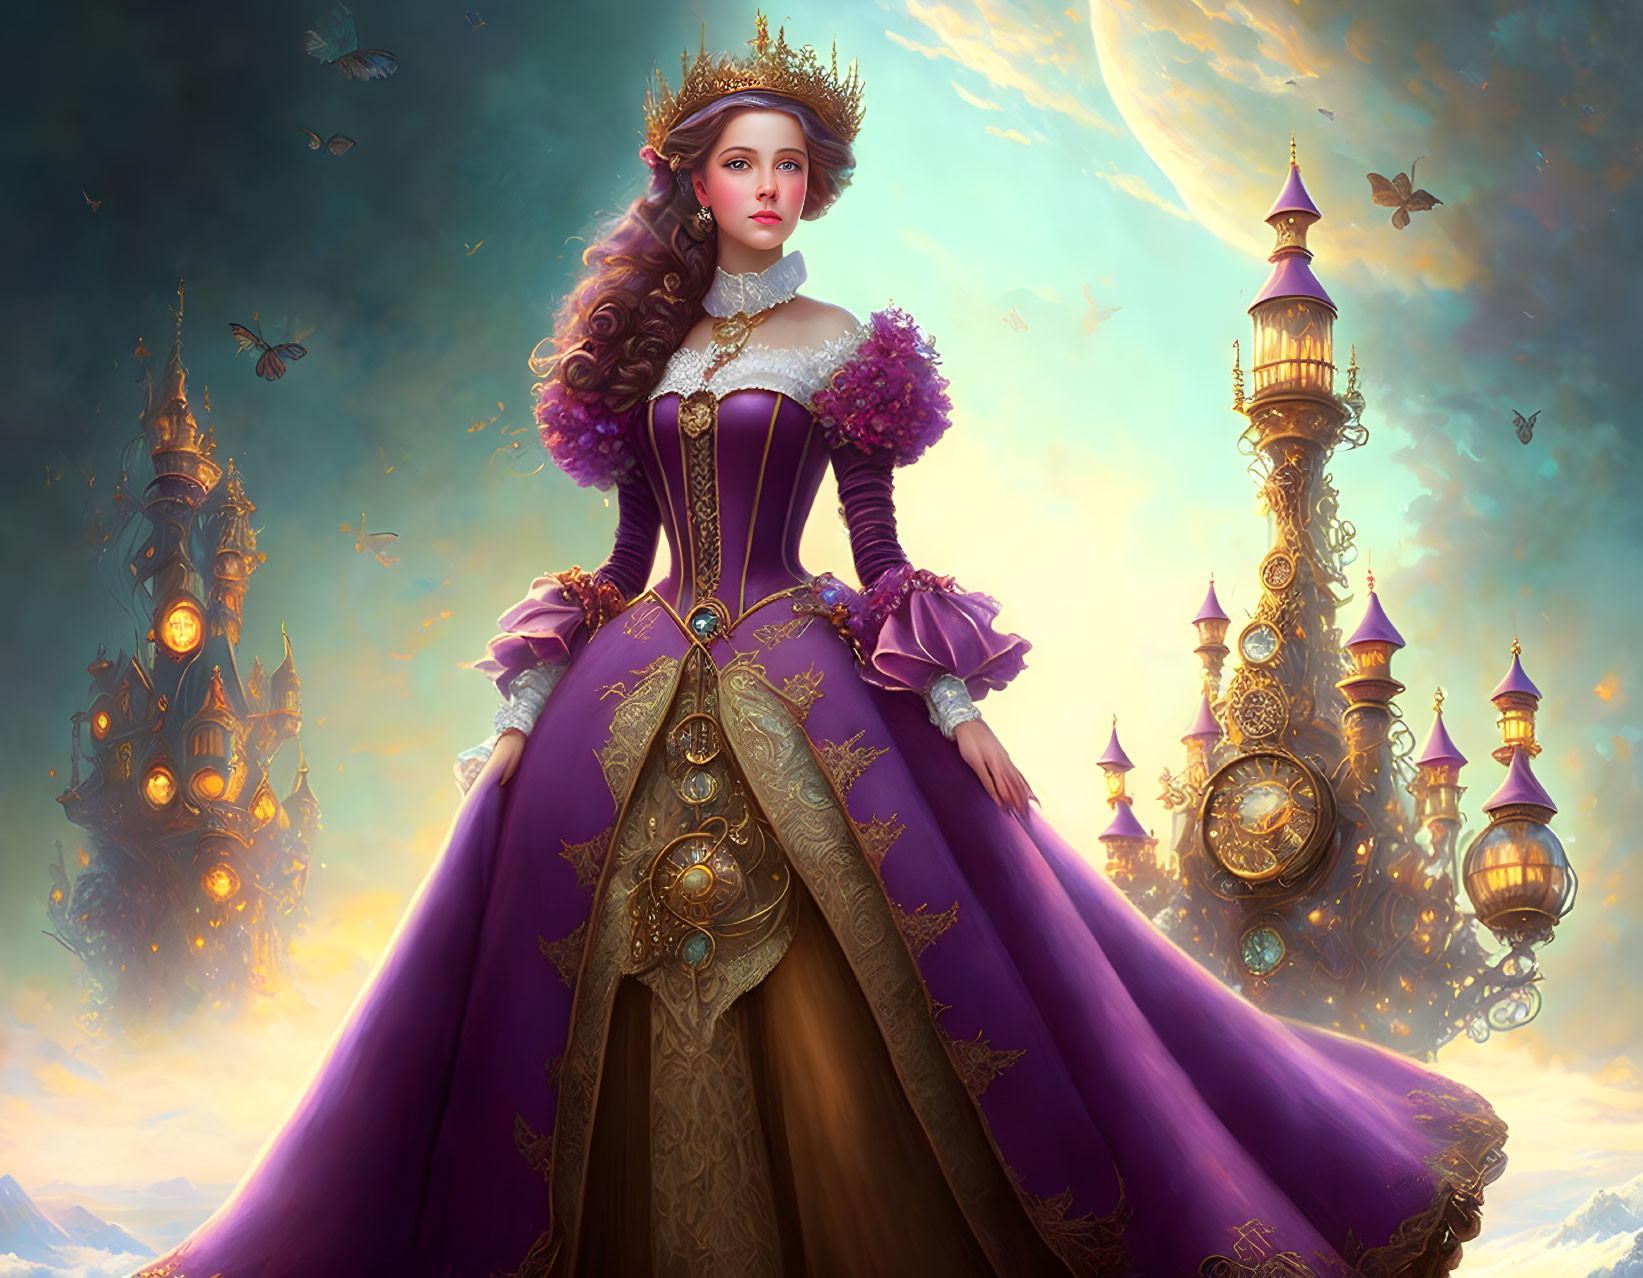 Regal lady in ornate purple gown before fantastical floating city.